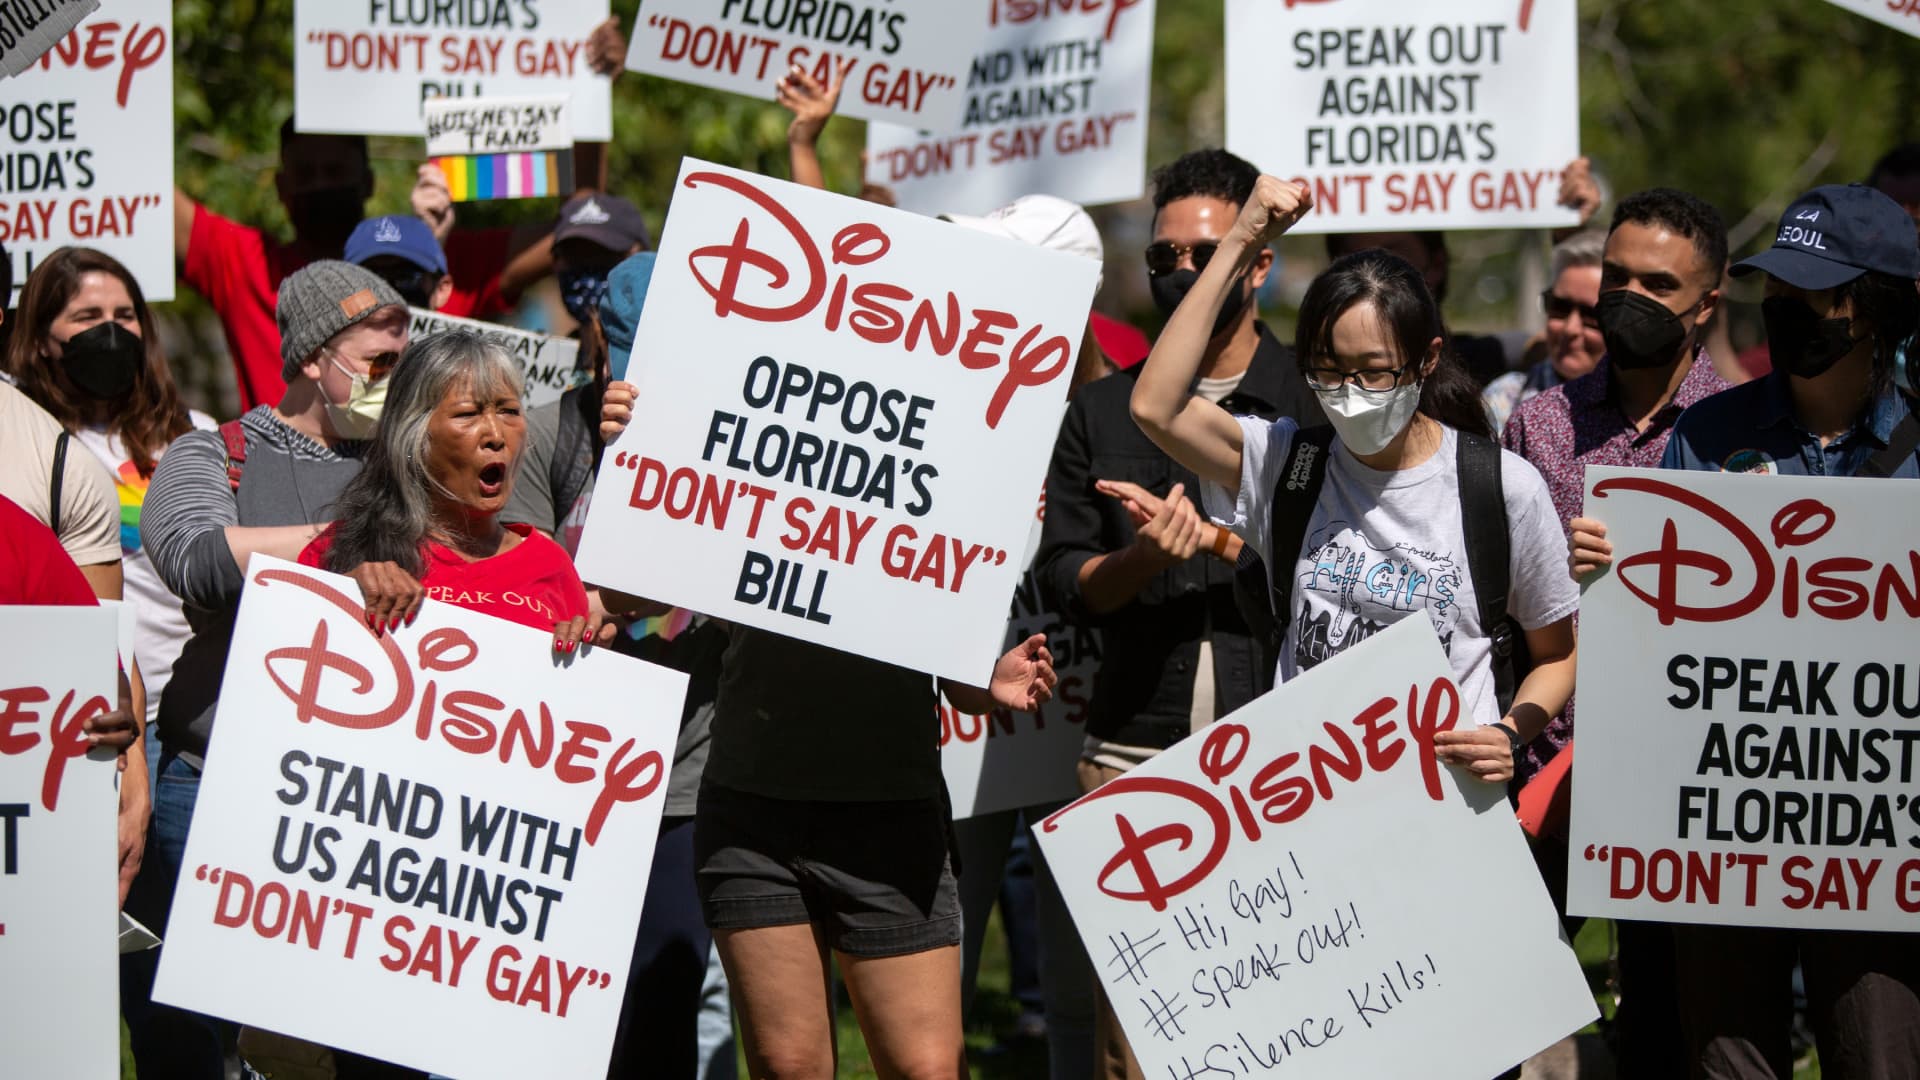 Disney vows to help repeal 'Don't Say Gay' law